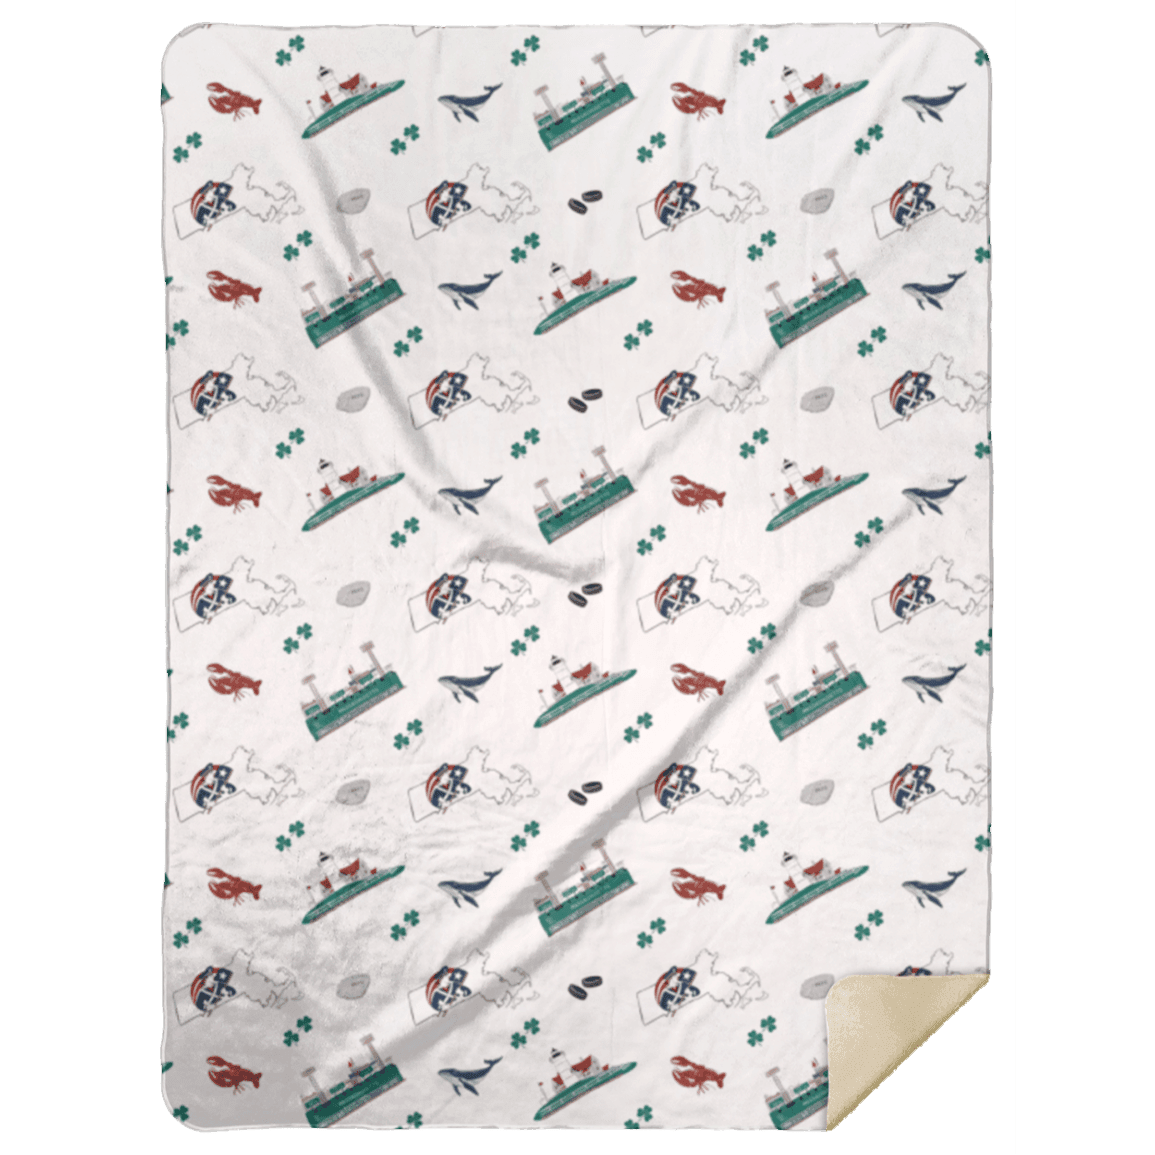 Massachusetts-themed plush throw blanket with state map, landmarks, and icons in vibrant colors on a white background.